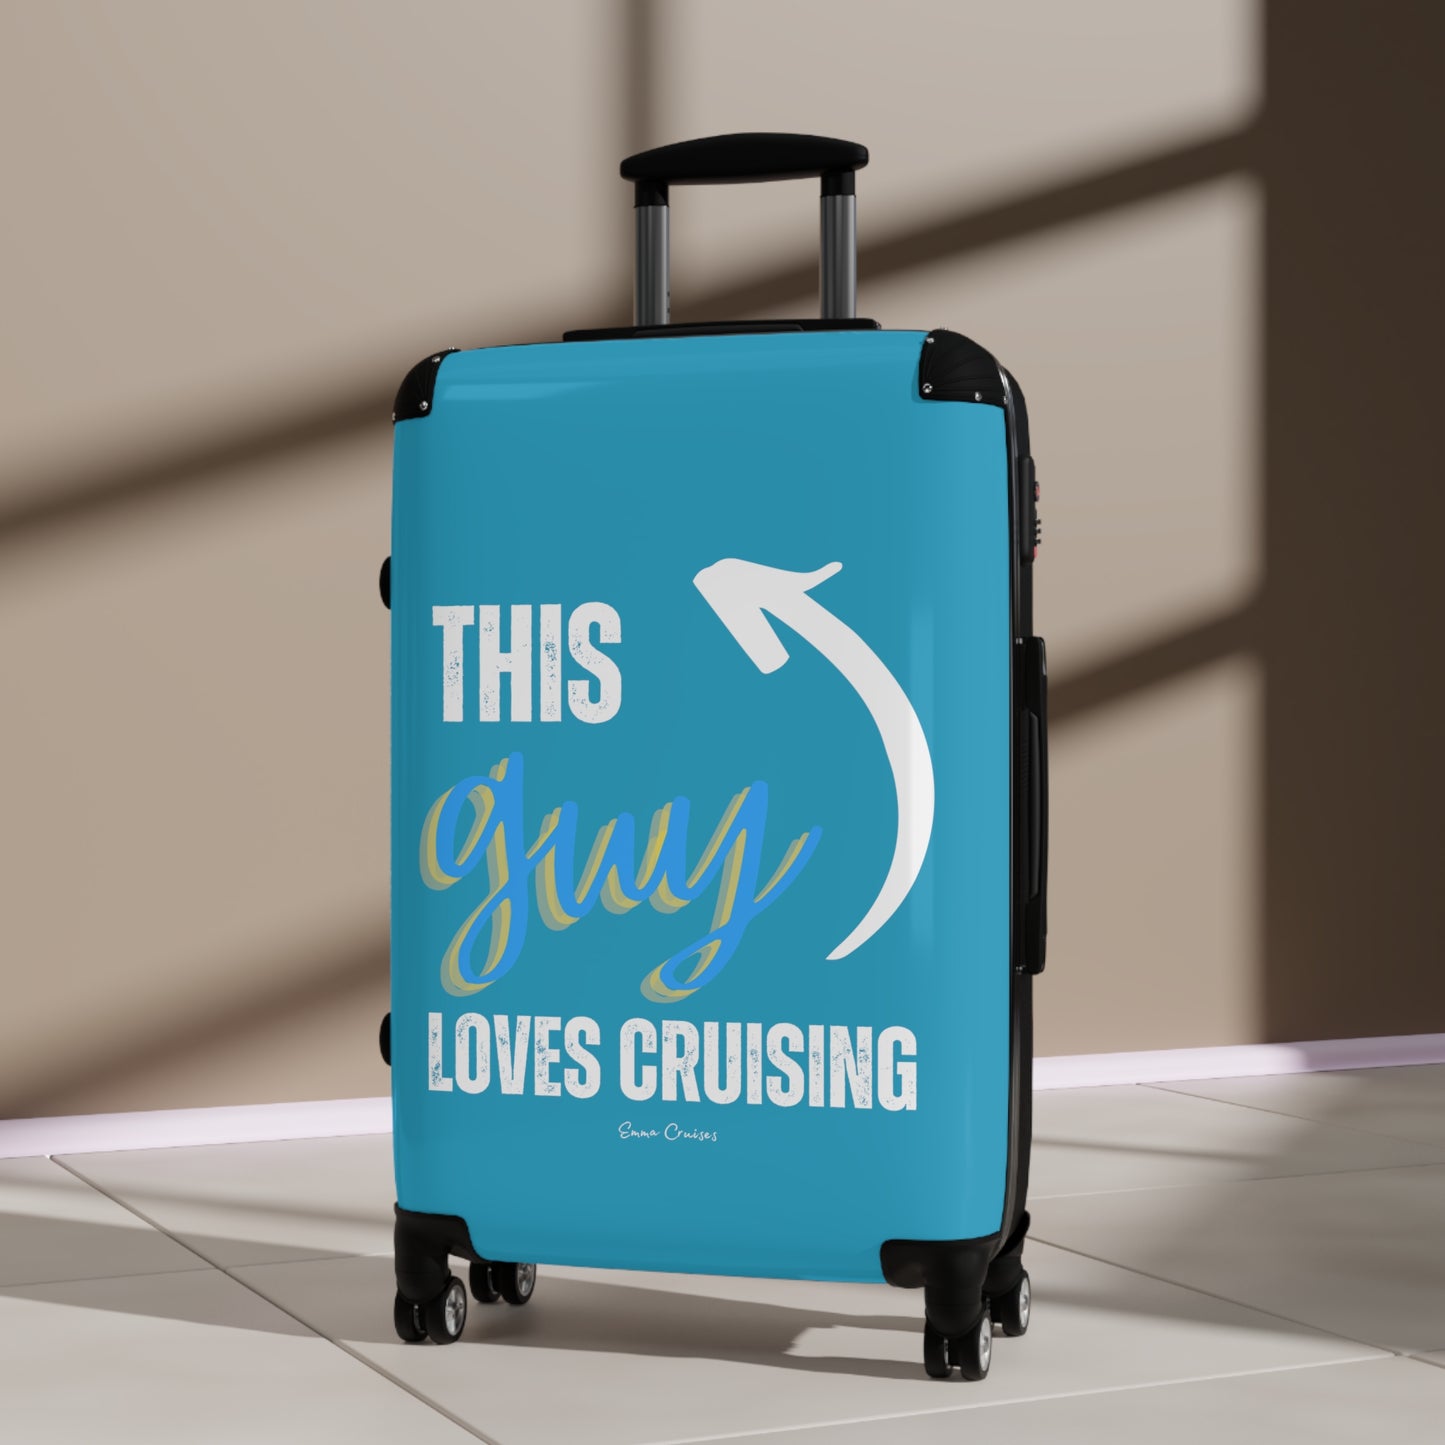 This Guy Loves Cruising - Suitcase